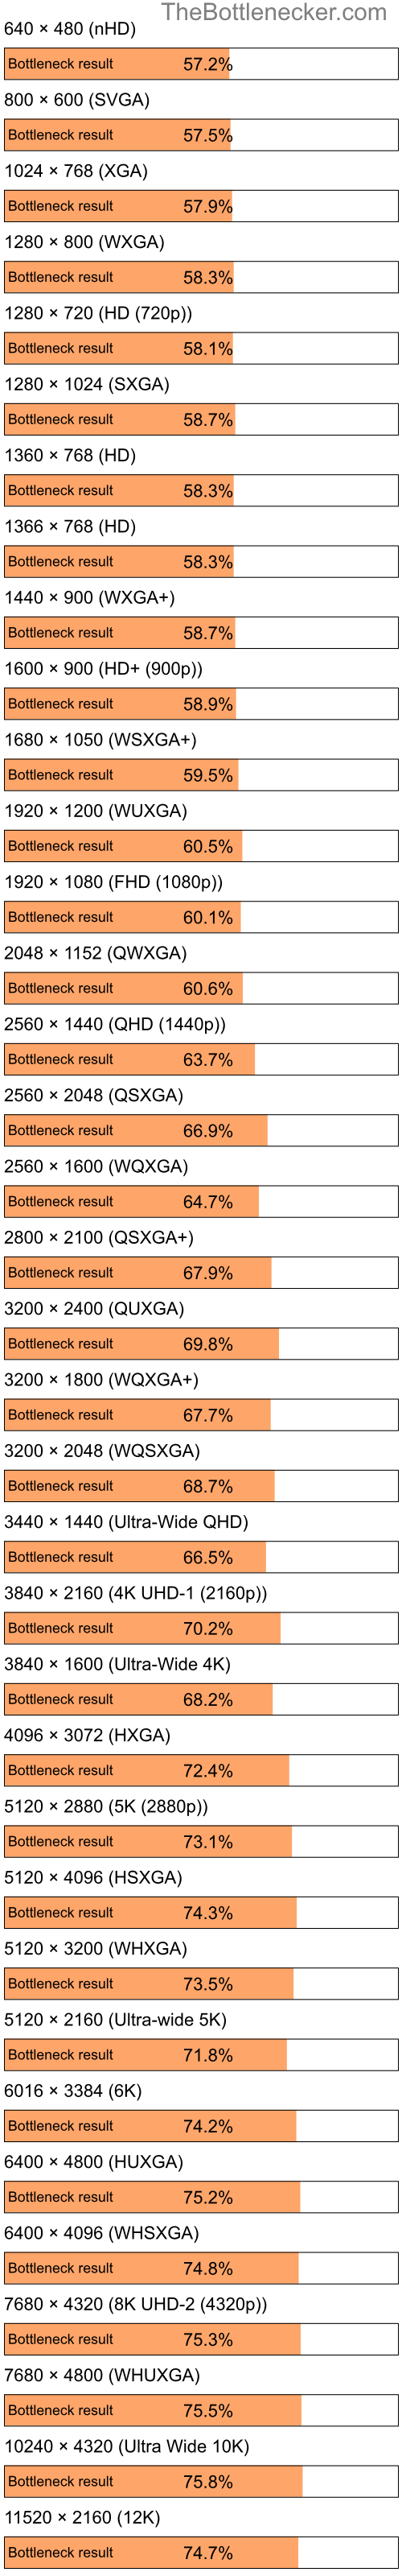 Bottleneck results by resolution for Intel Pentium 4 and AMD M880G with Mobility Radeon HD 4250 in General Tasks